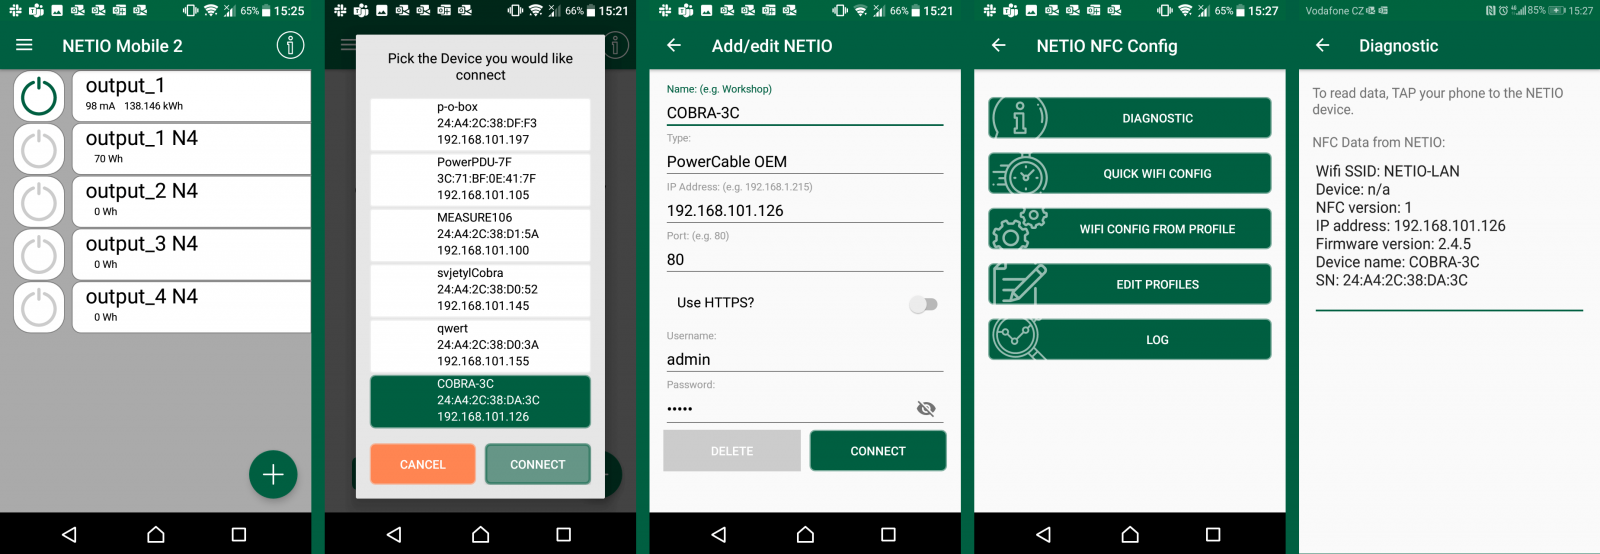 Screenshots of NETIO Mobile App 2, android app for controlling NETIO networked smart power sockets